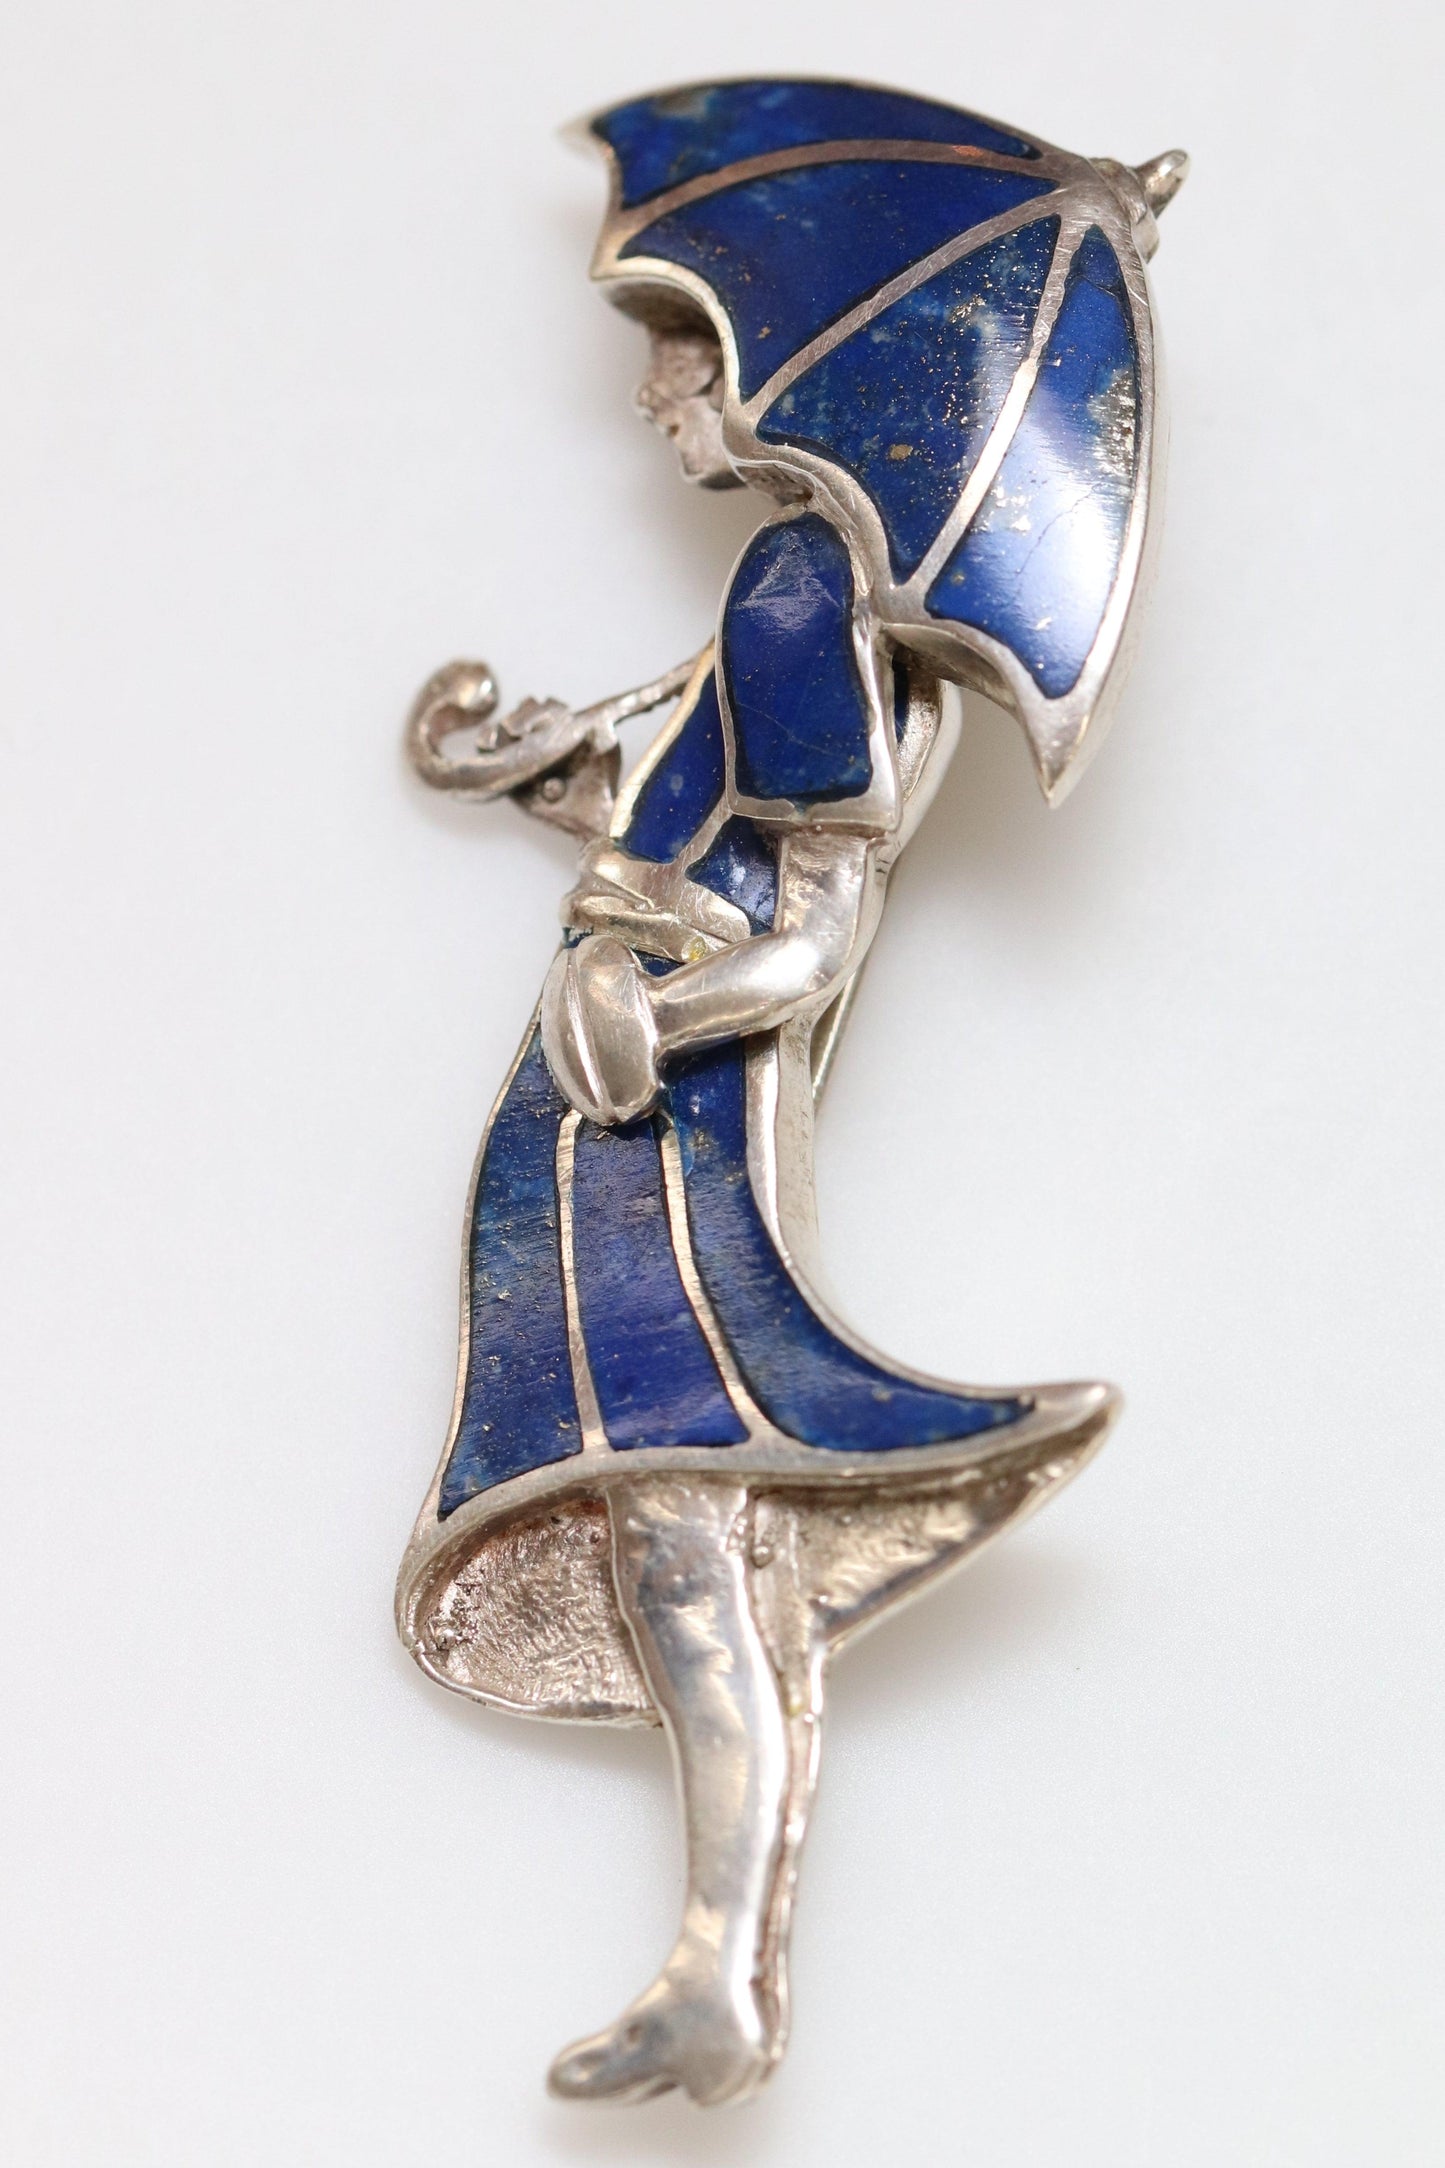 Vintage Handcrafted Silver Jewelry | Art Deco Girl and Umbrella Lapis Lazuli Brooch - Carmel Fine Silver Jewelry